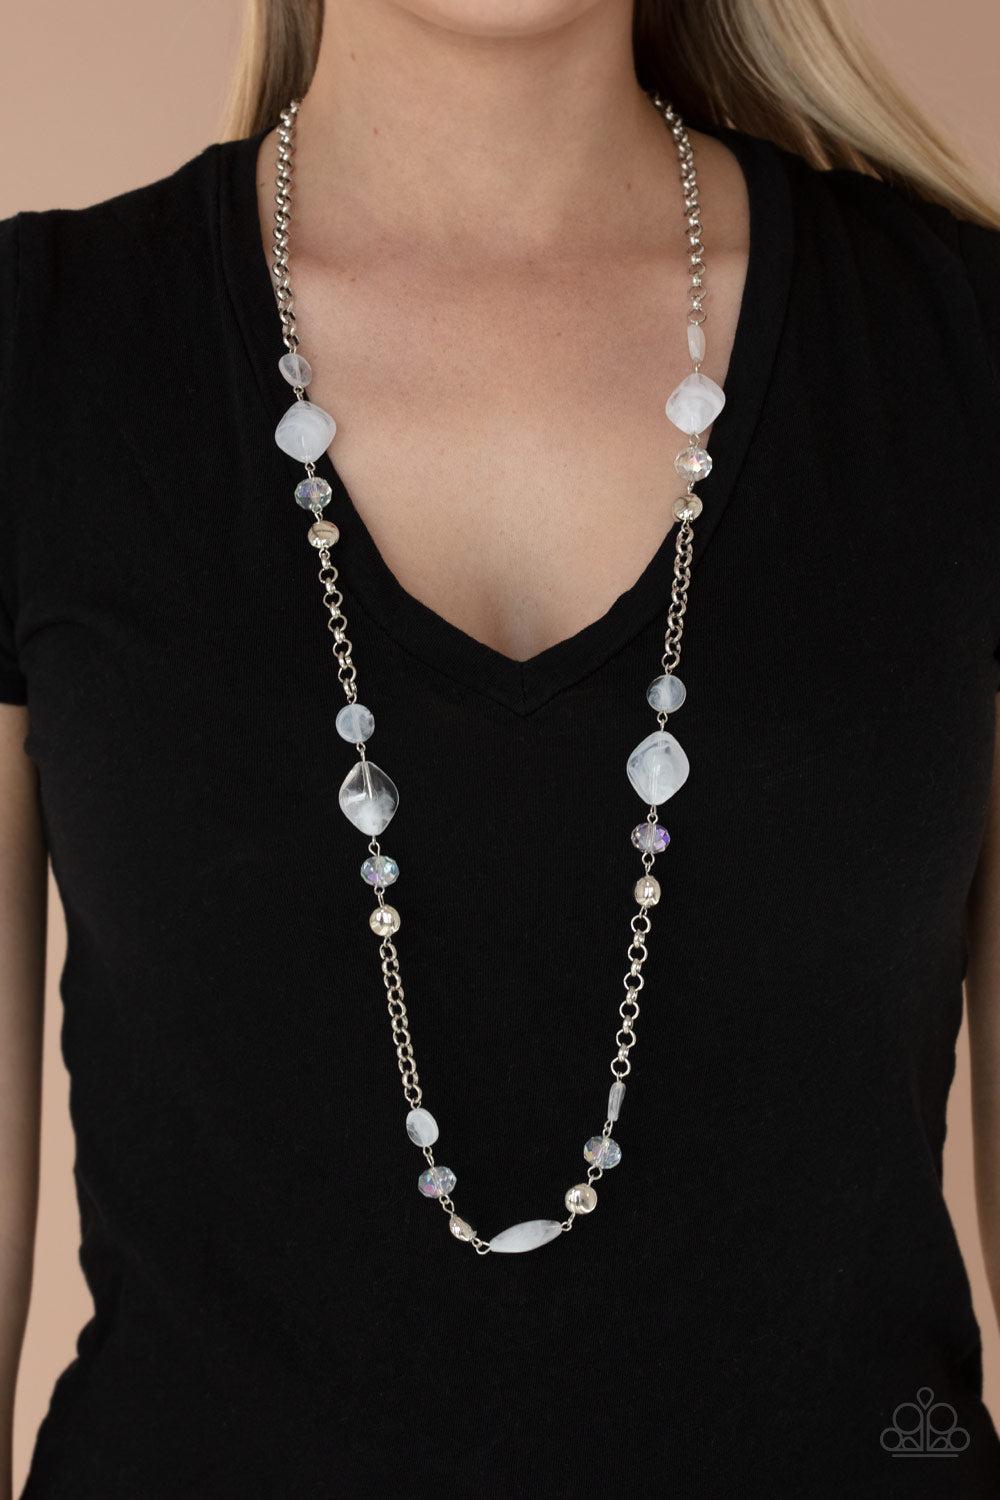 Light-Scattering Luminosity White Necklace - Paparazzi Accessories- lightbox - CarasShop.com - $5 Jewelry by Cara Jewels